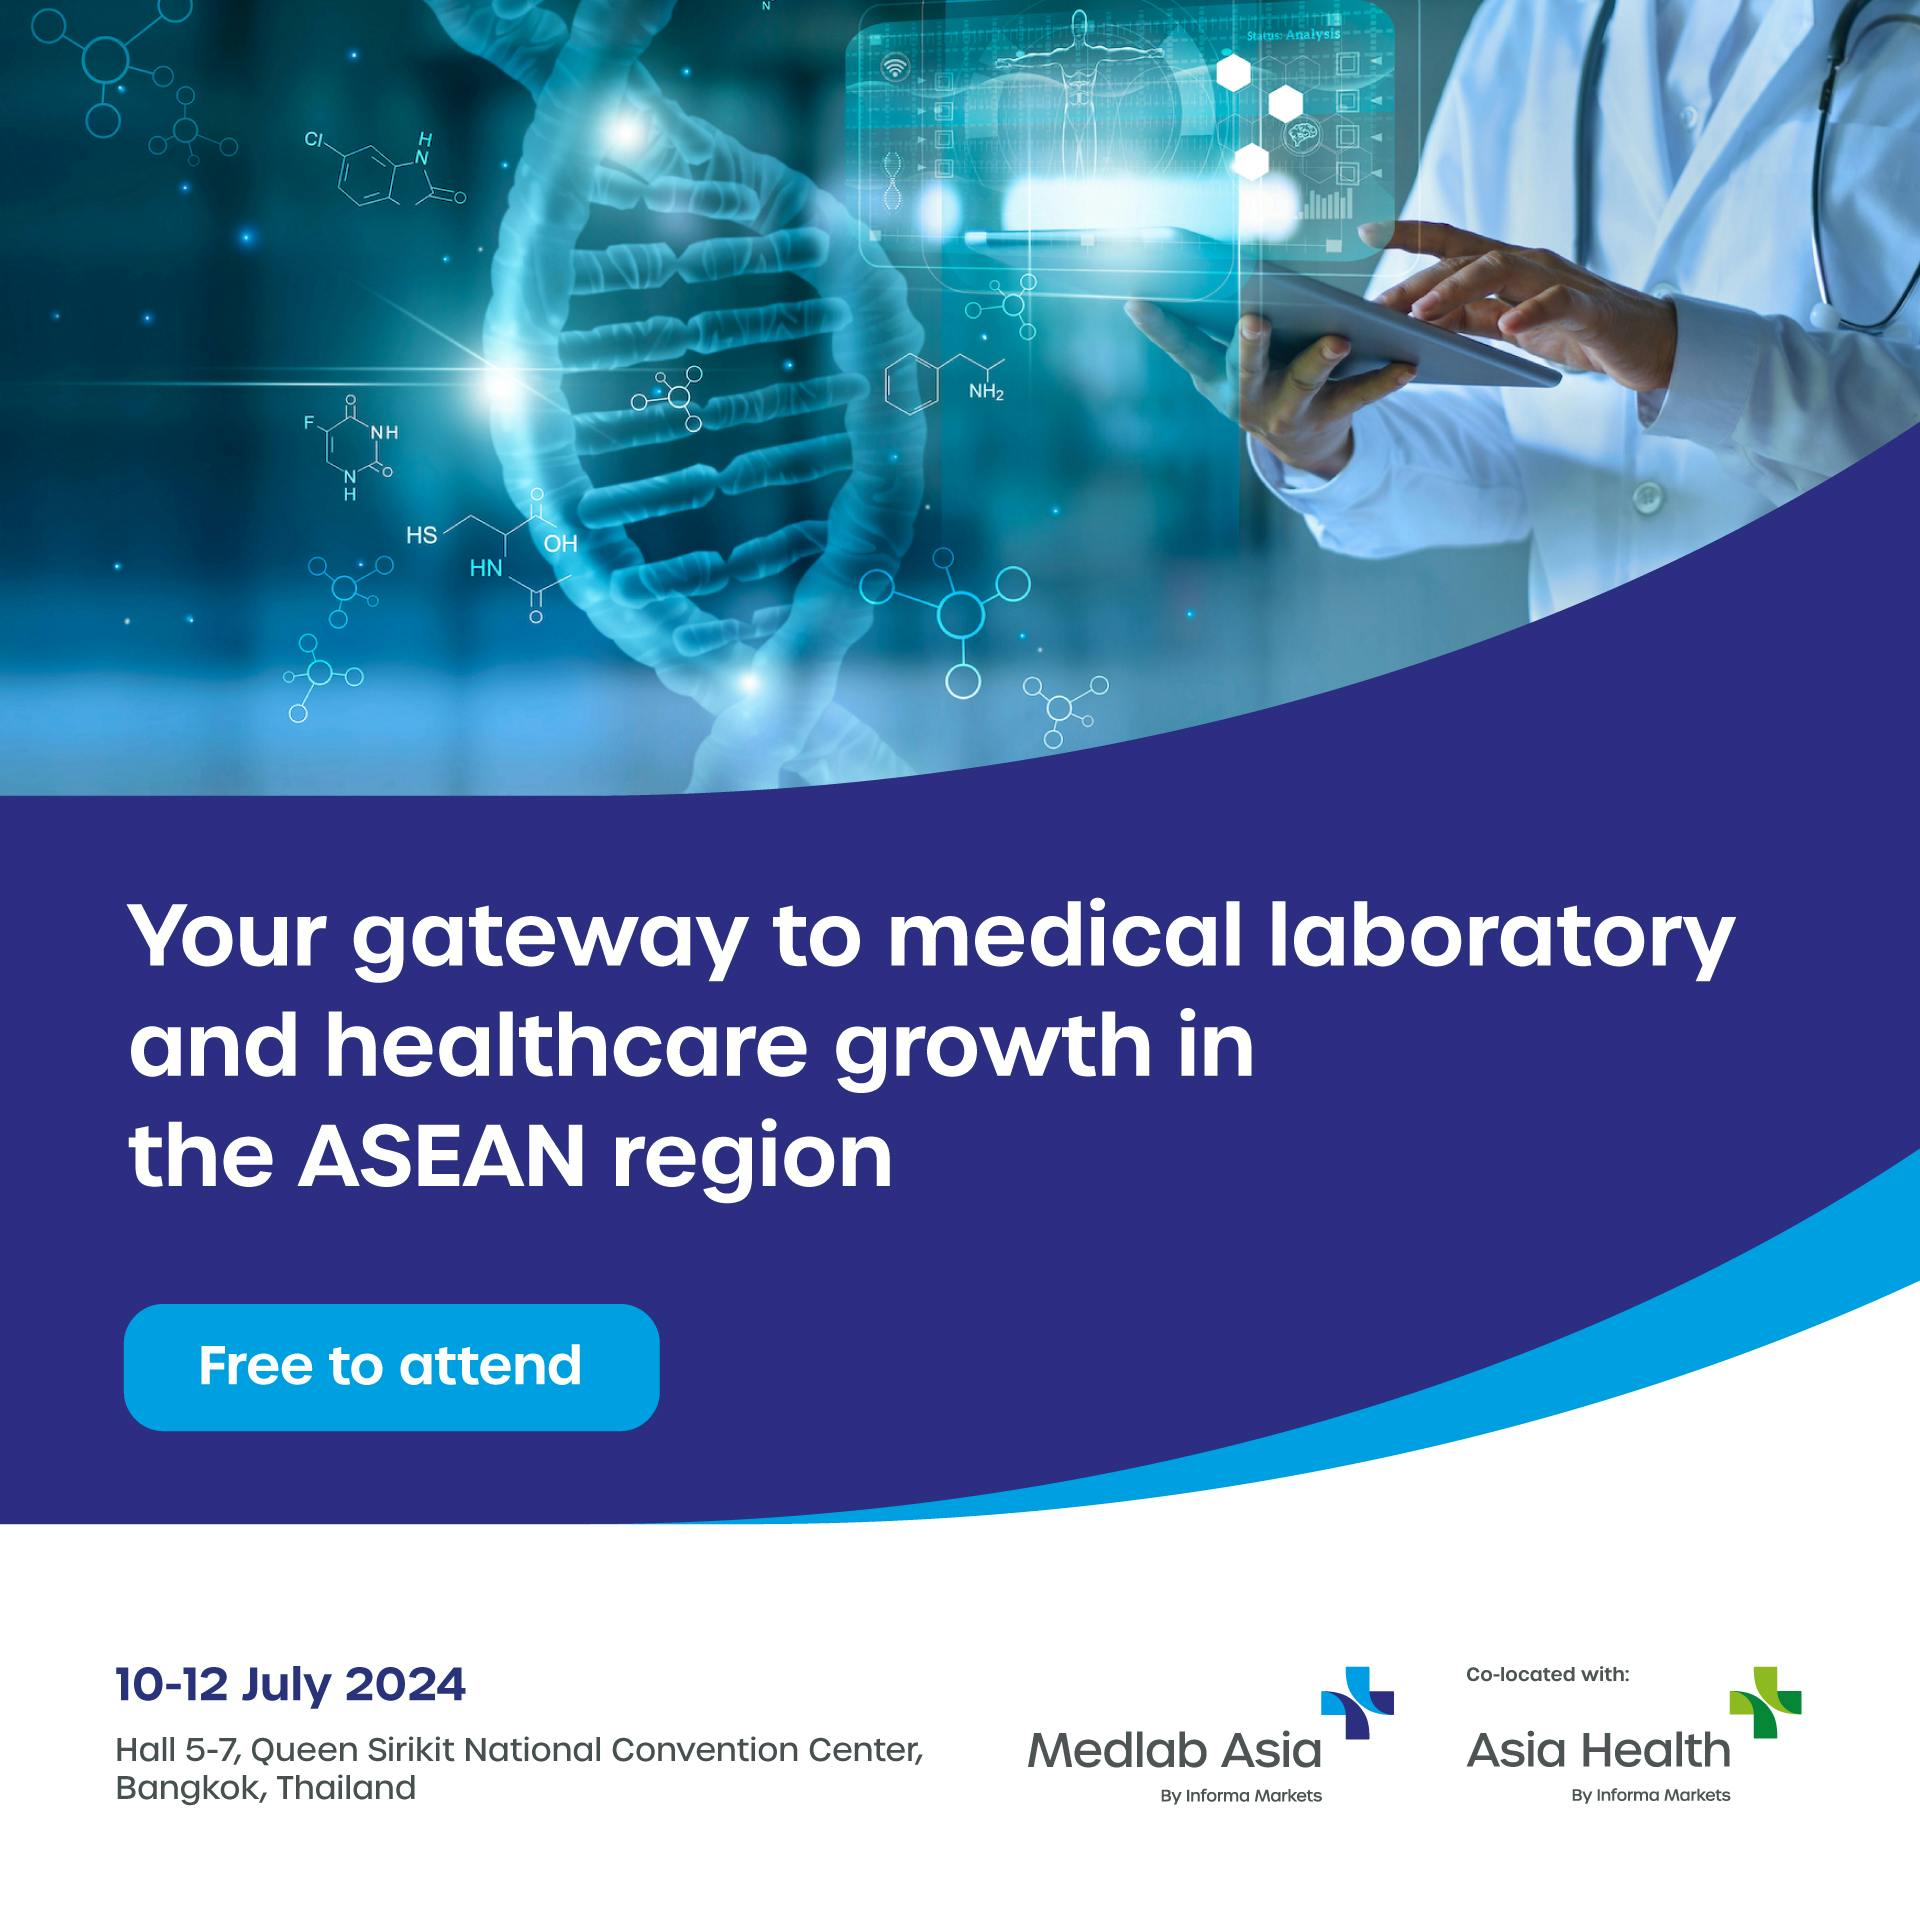 Medlab Asia and Asia Health